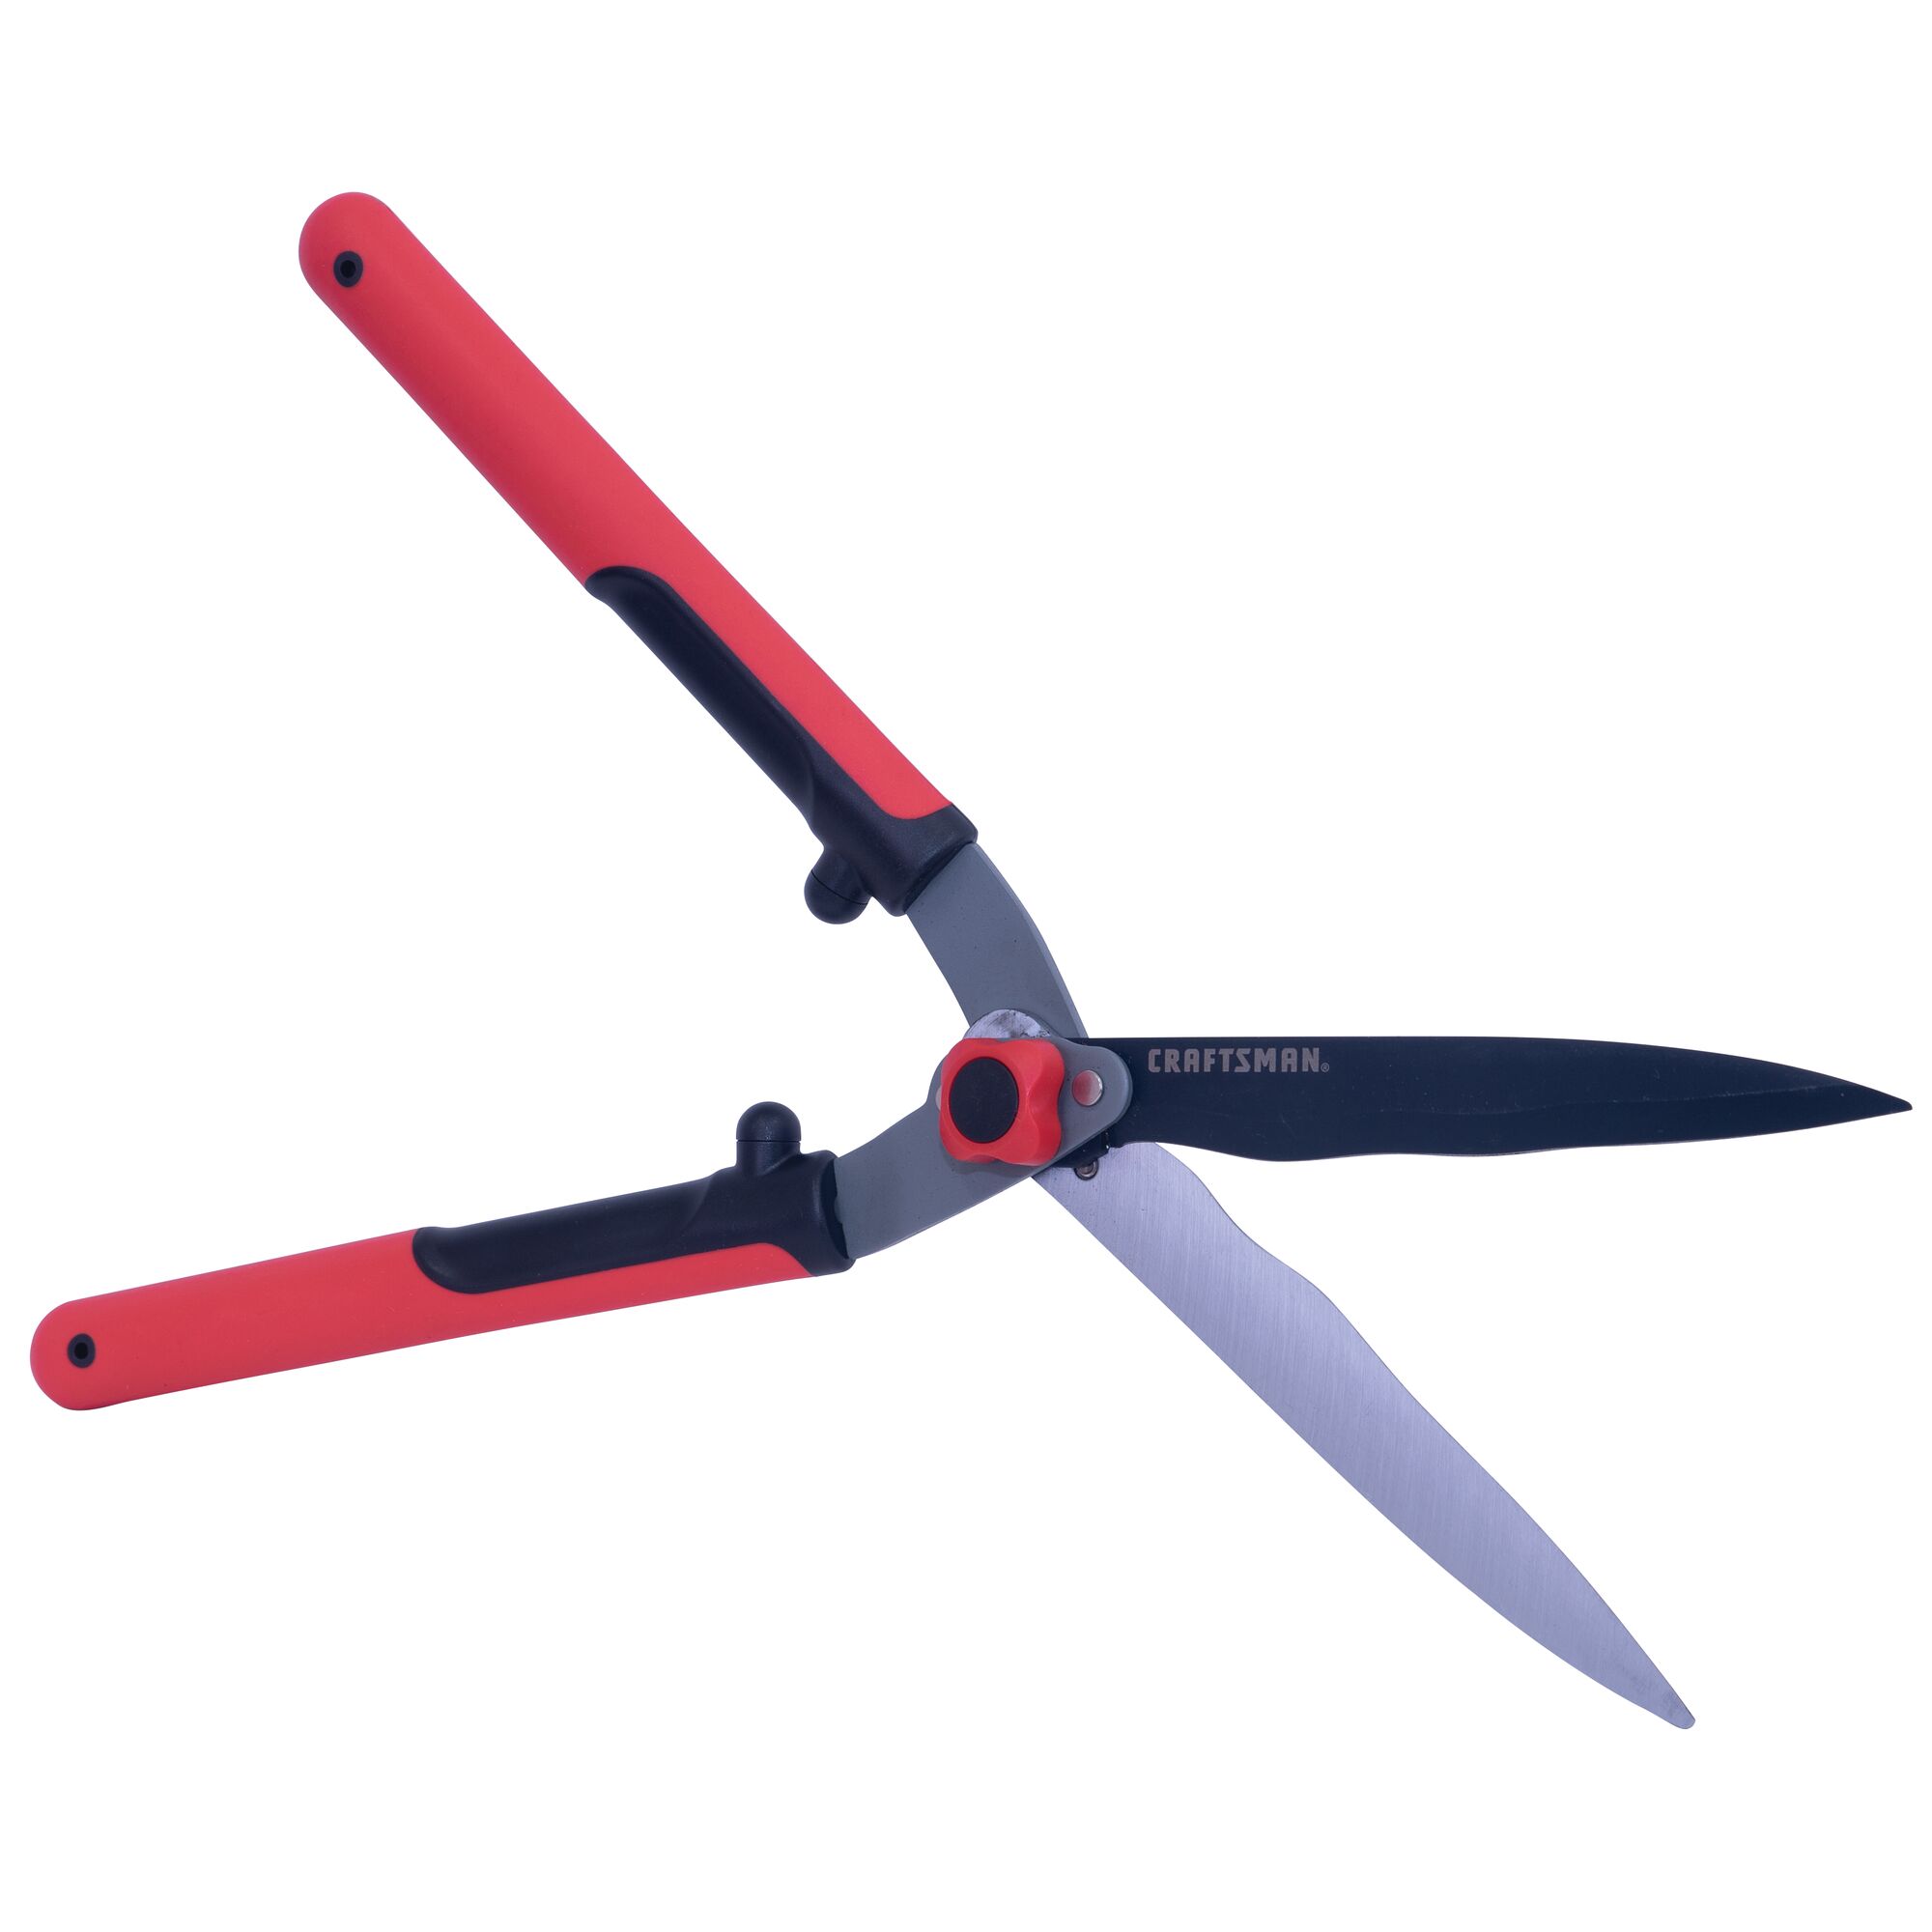 Hedge shears with opened blades.